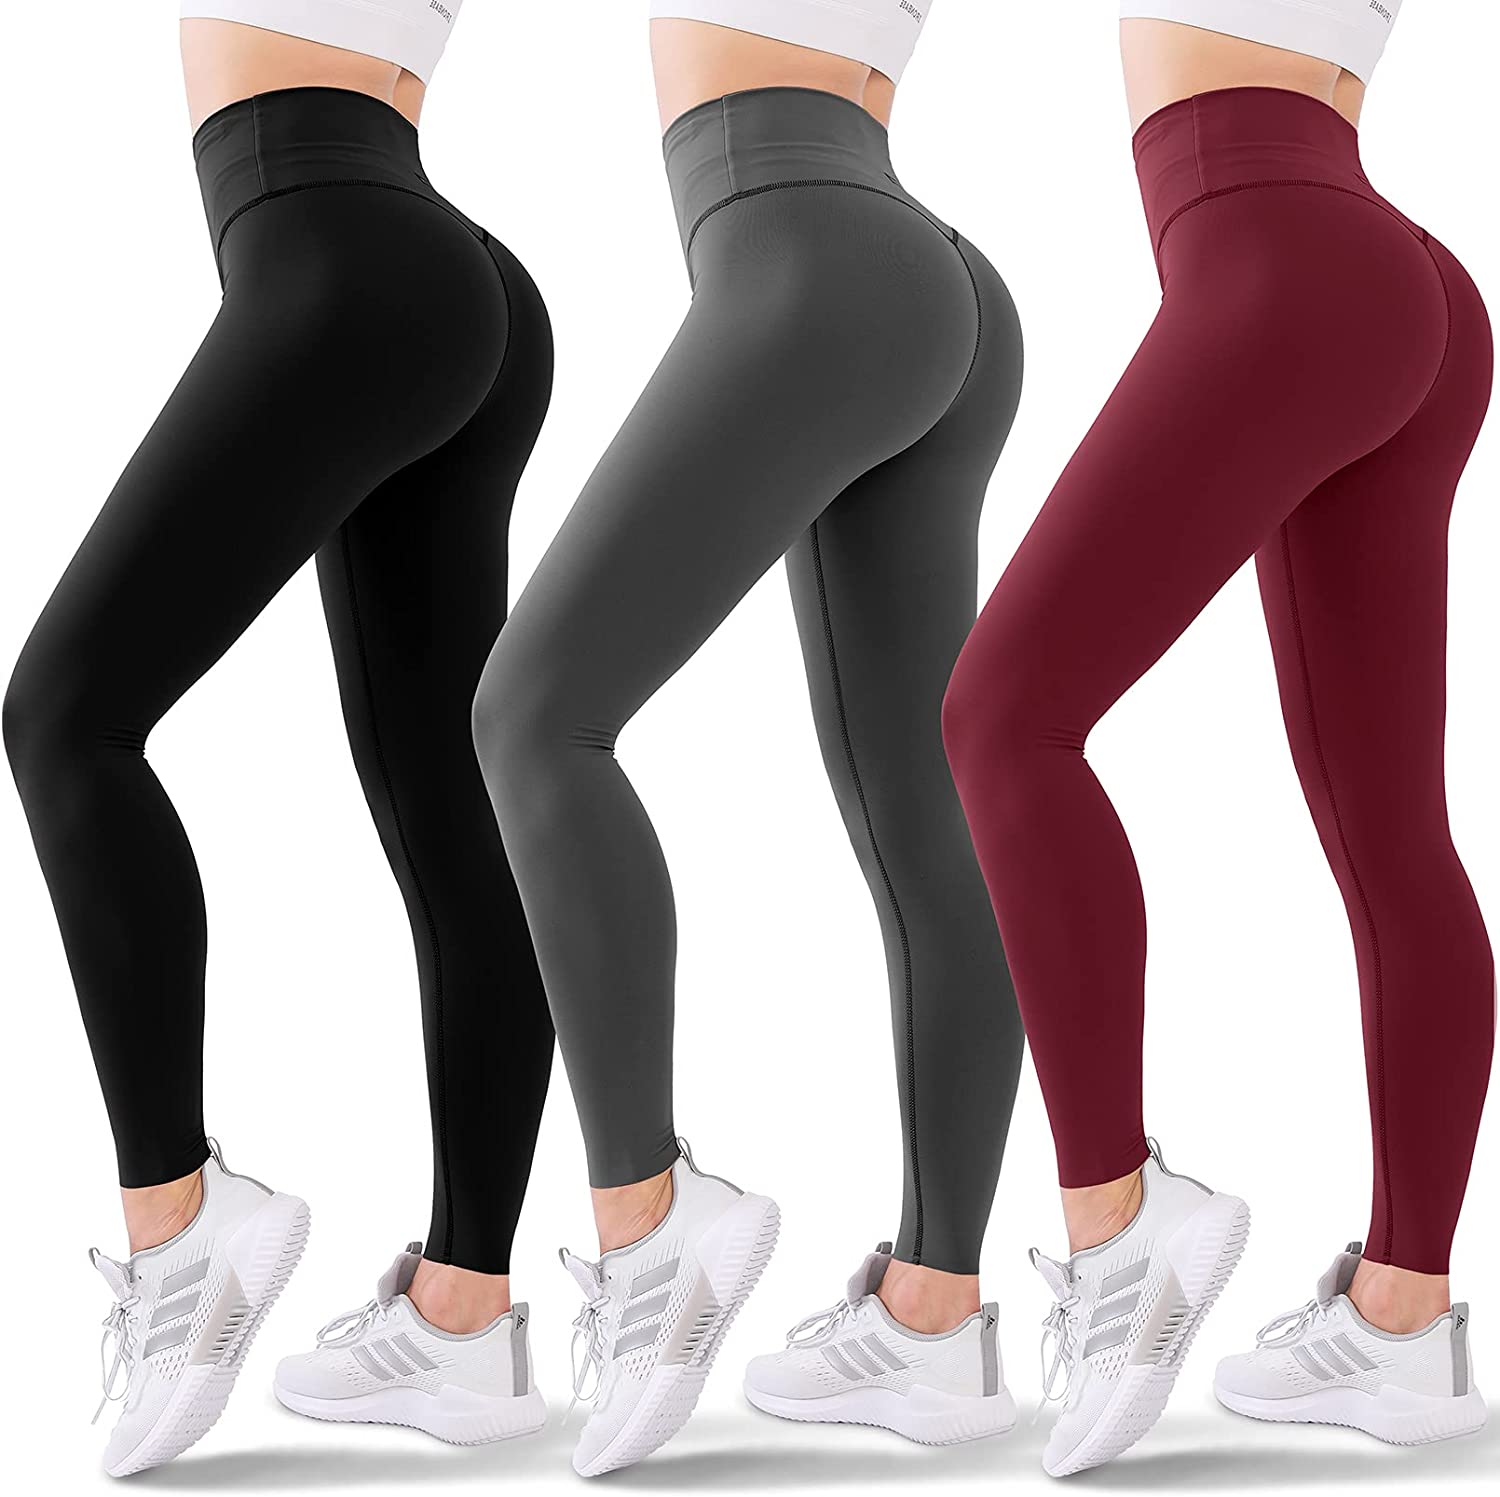 3 Pack Leggings for Women-No See-Through High Waisted Tummy Control Yoga Pants Workout Running Legging 